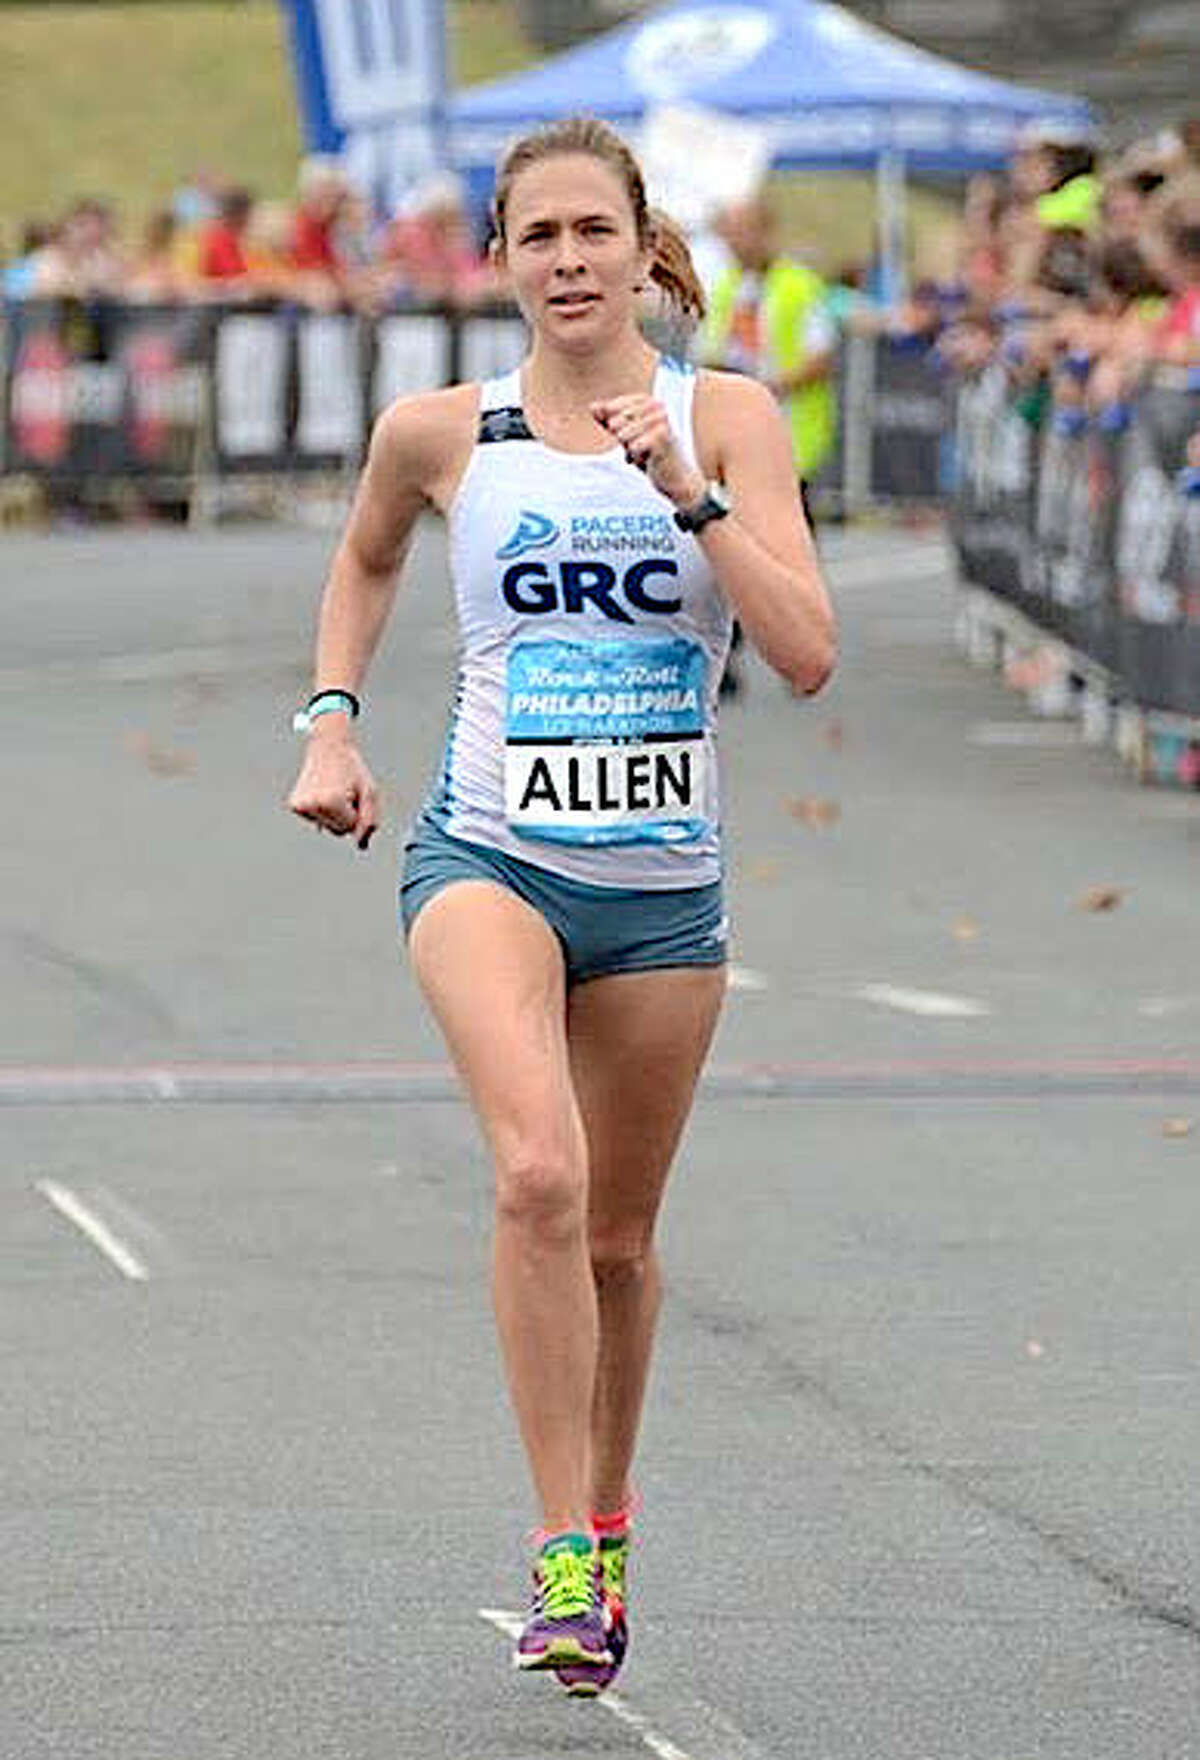 Distance runner Kerry Allen will be running her first race in 19 months at the Freihofer's Run for Women since dropping out at 21 miles in the U.S. Olympic marathon trials.